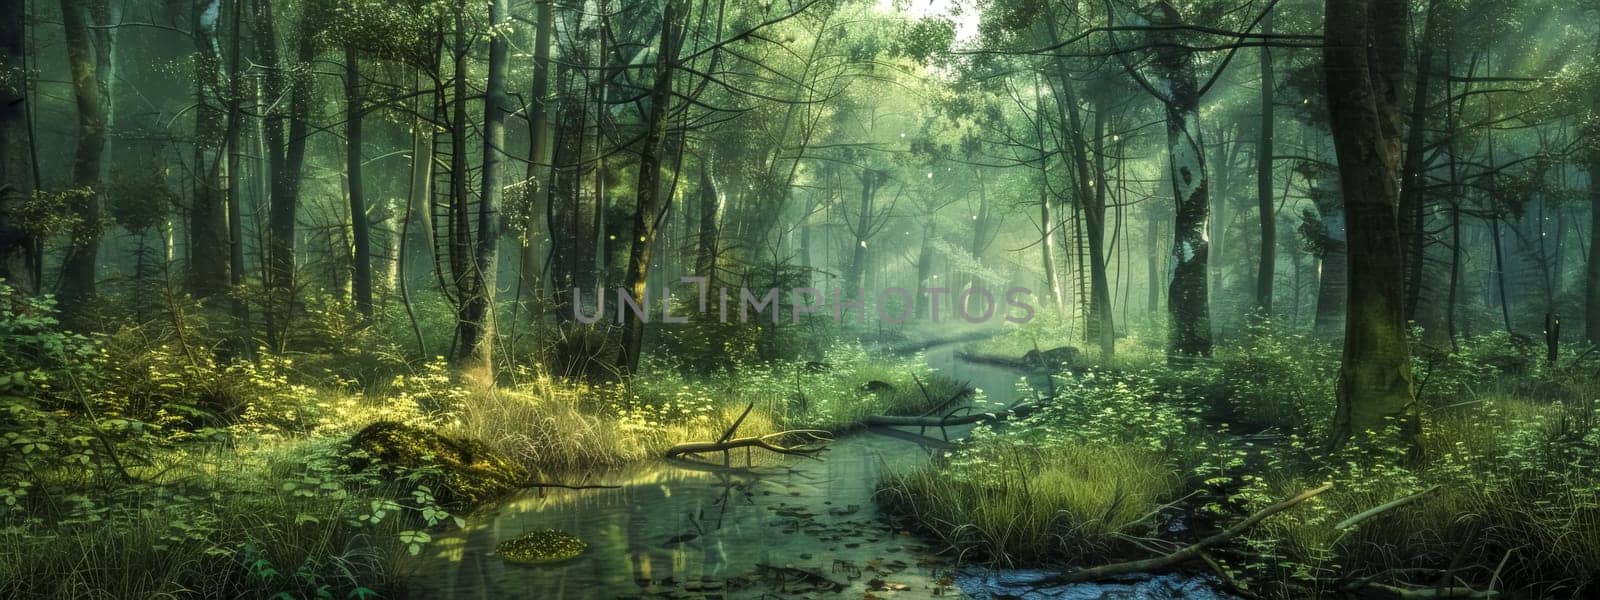 Mystical forest panorama in misty morning light by Edophoto